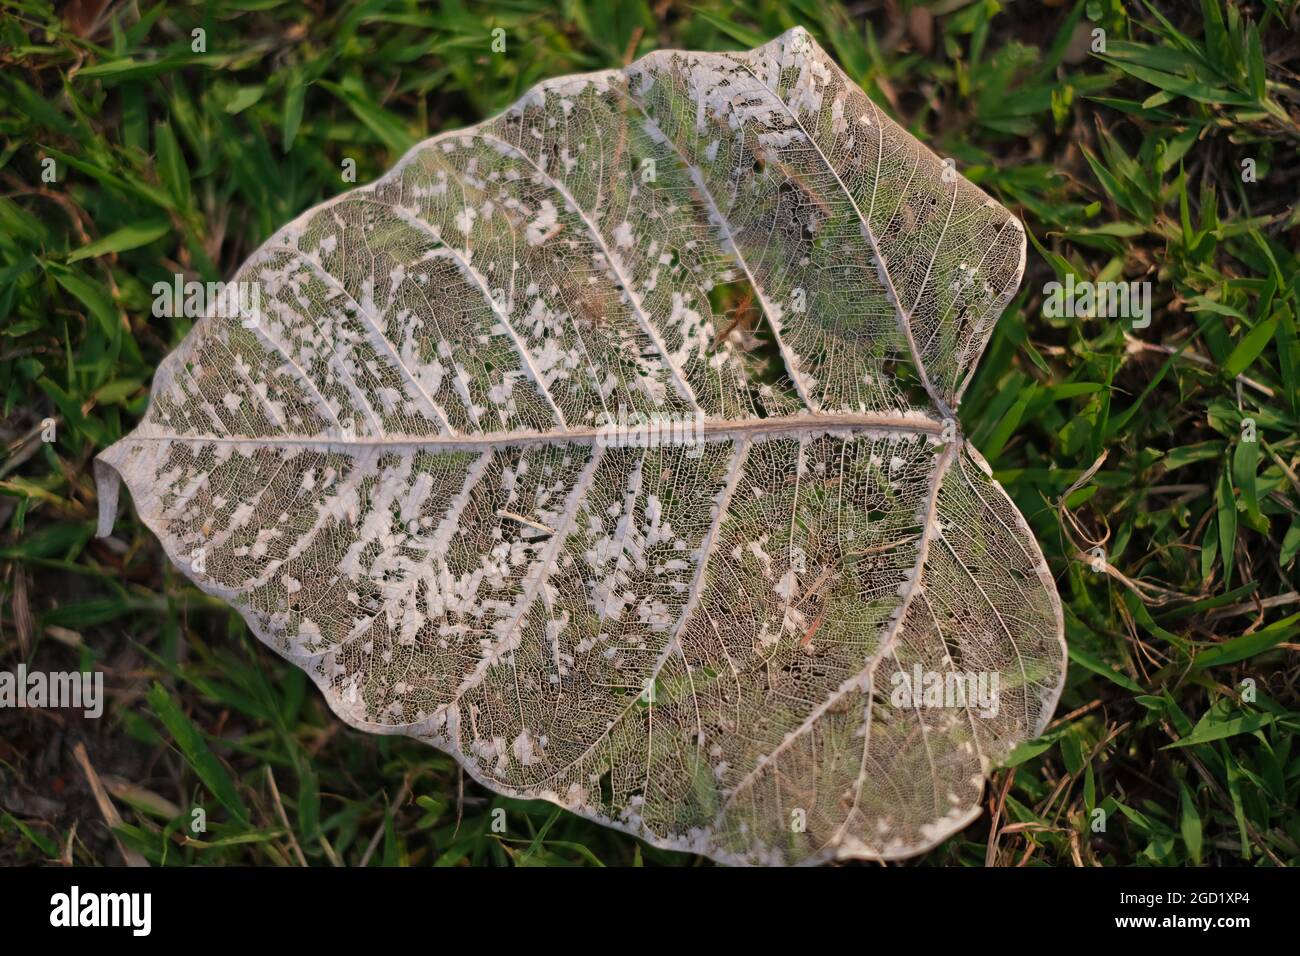 A skeleton of big fallen leaf, translucent and bleached, resting on a grass, illuminated by a setting sun Stock Photo